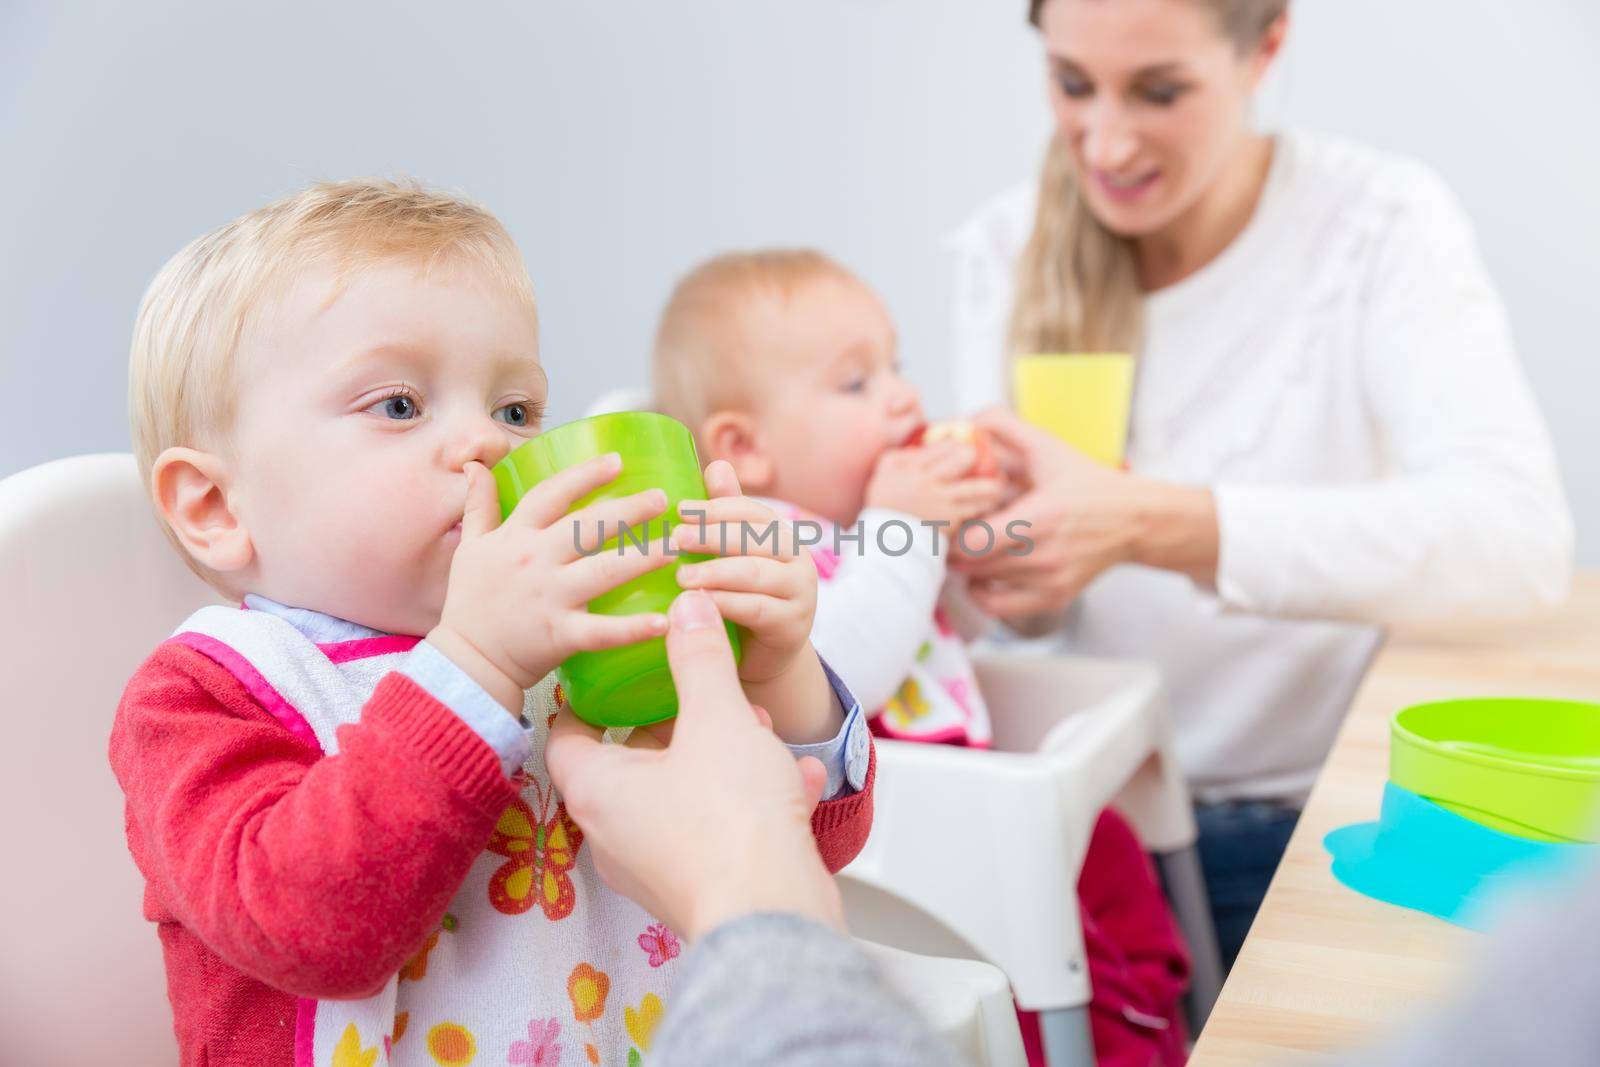 Portrait of a cute baby boy learning to drink water from a plastic glass, while sitting in a high chair next to another baby at home or in a modern daycare center for infants